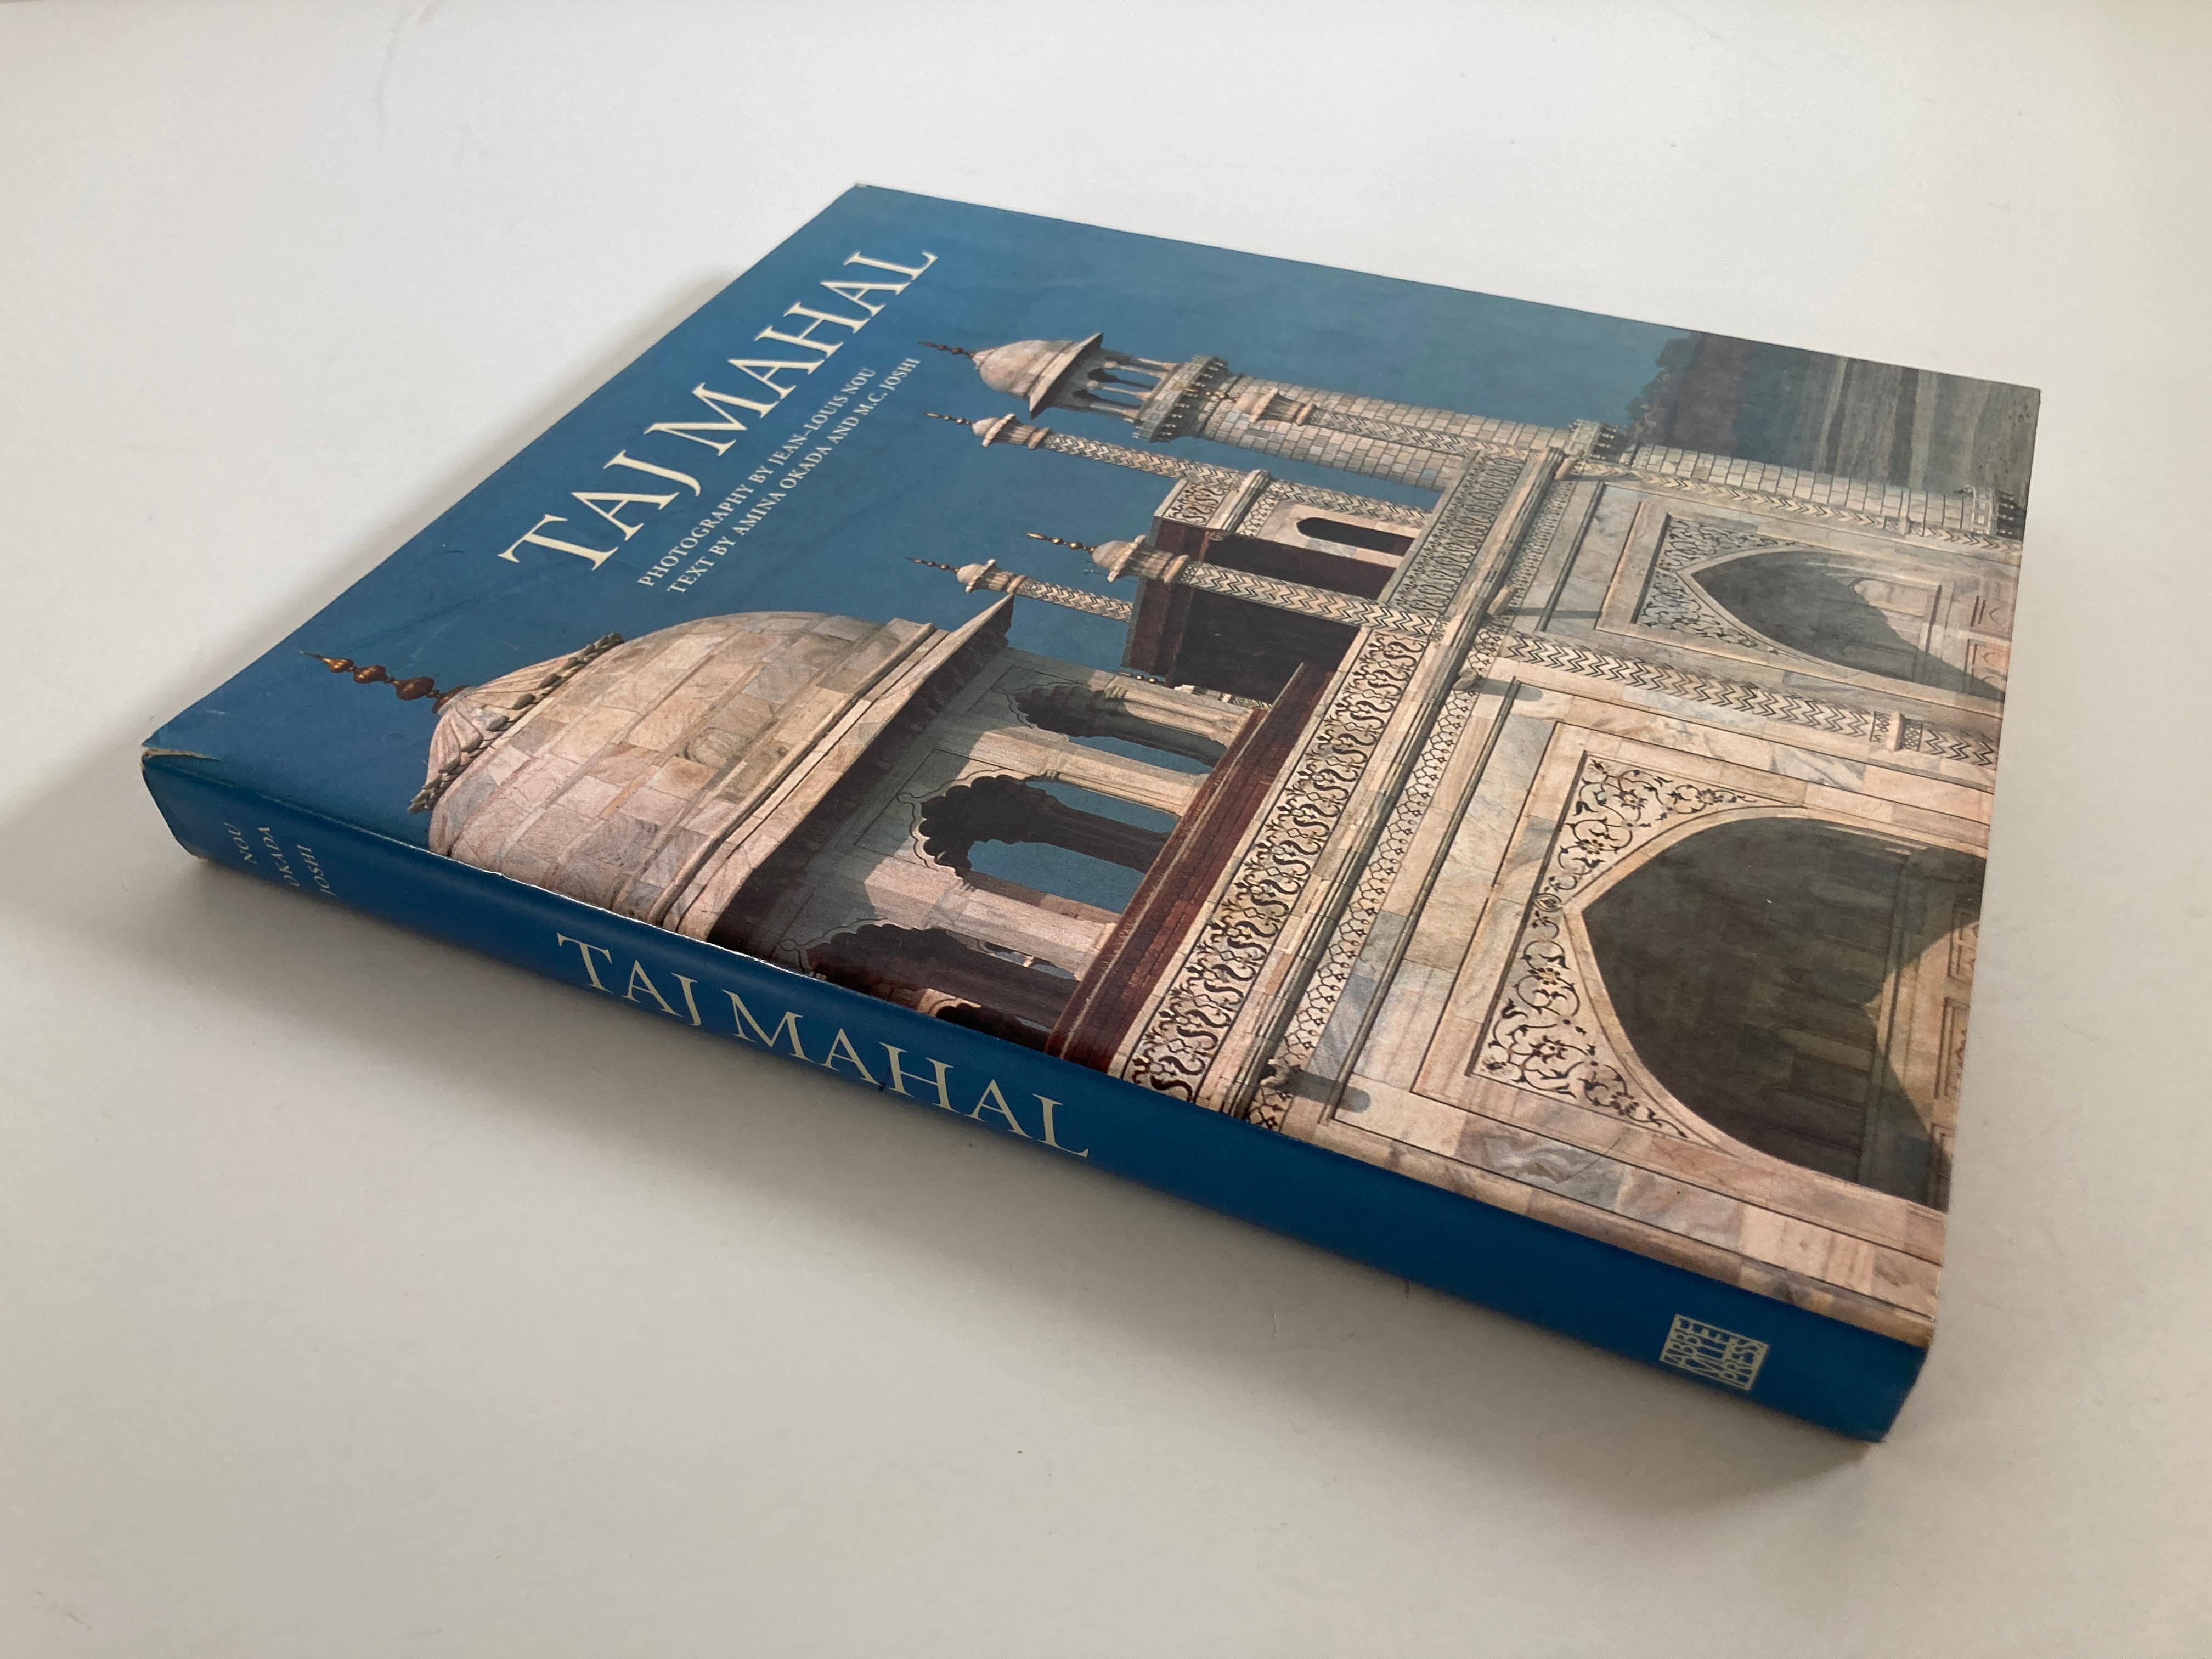 Taj Mahal Hardcover, October 19, 1993
by Mohan C. Joshi (Author), Amina Okada (Author).
In their informative texts, authors Amina Okada and M.C. Joshi provide historical and architectural analyses of the Taj Mahal. Quotations from the Koran and